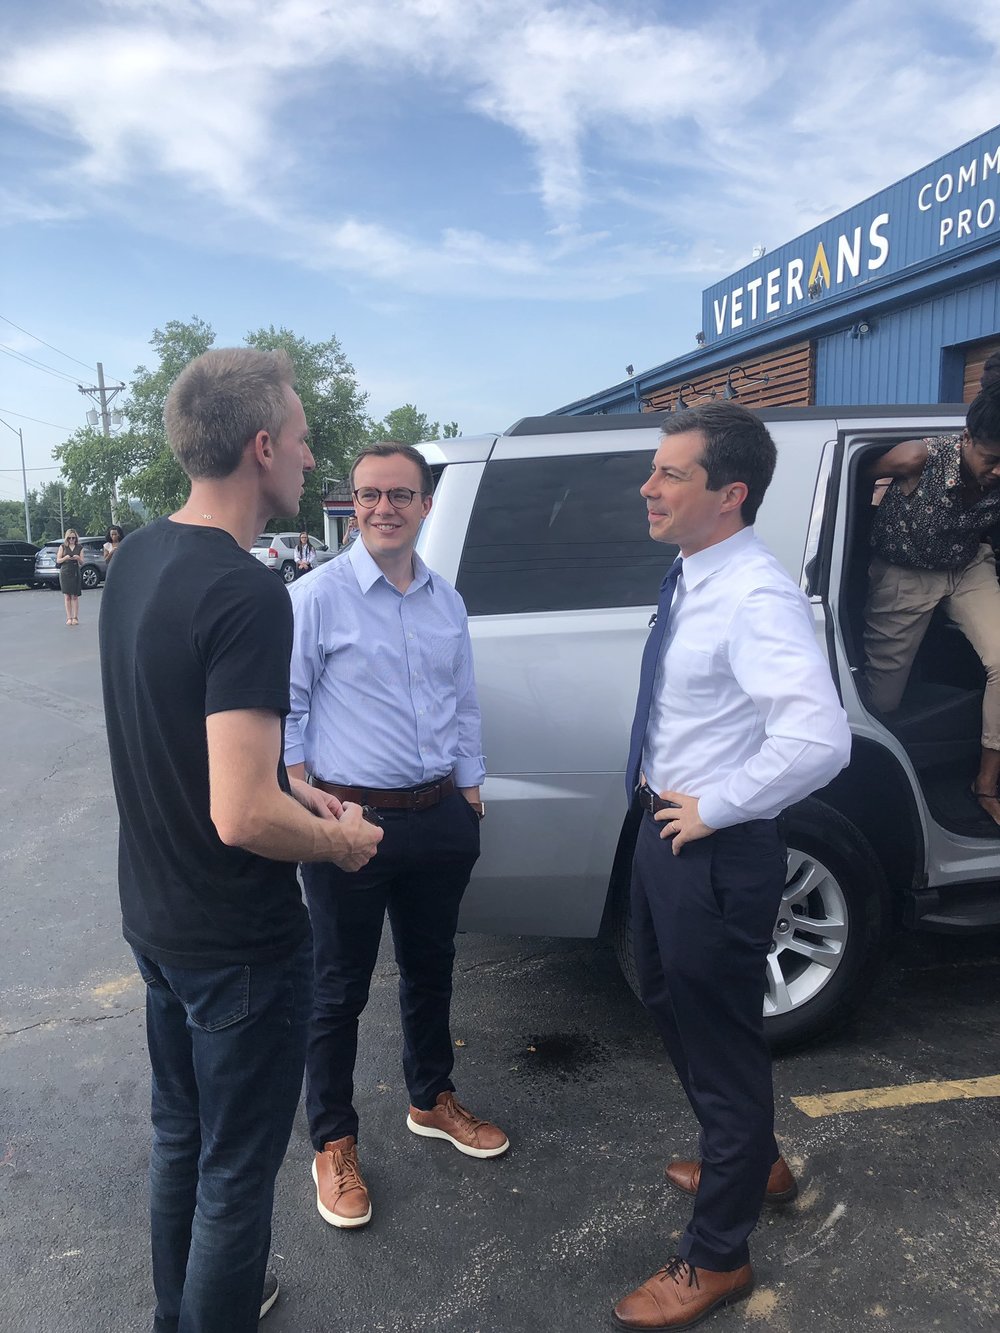  Pete and Chasten visit Veterans Community Project in Kansas City MO with Jason Kander on Jul 17, 2019. Posted on Twitter by George Hornedo ( LINK ) 